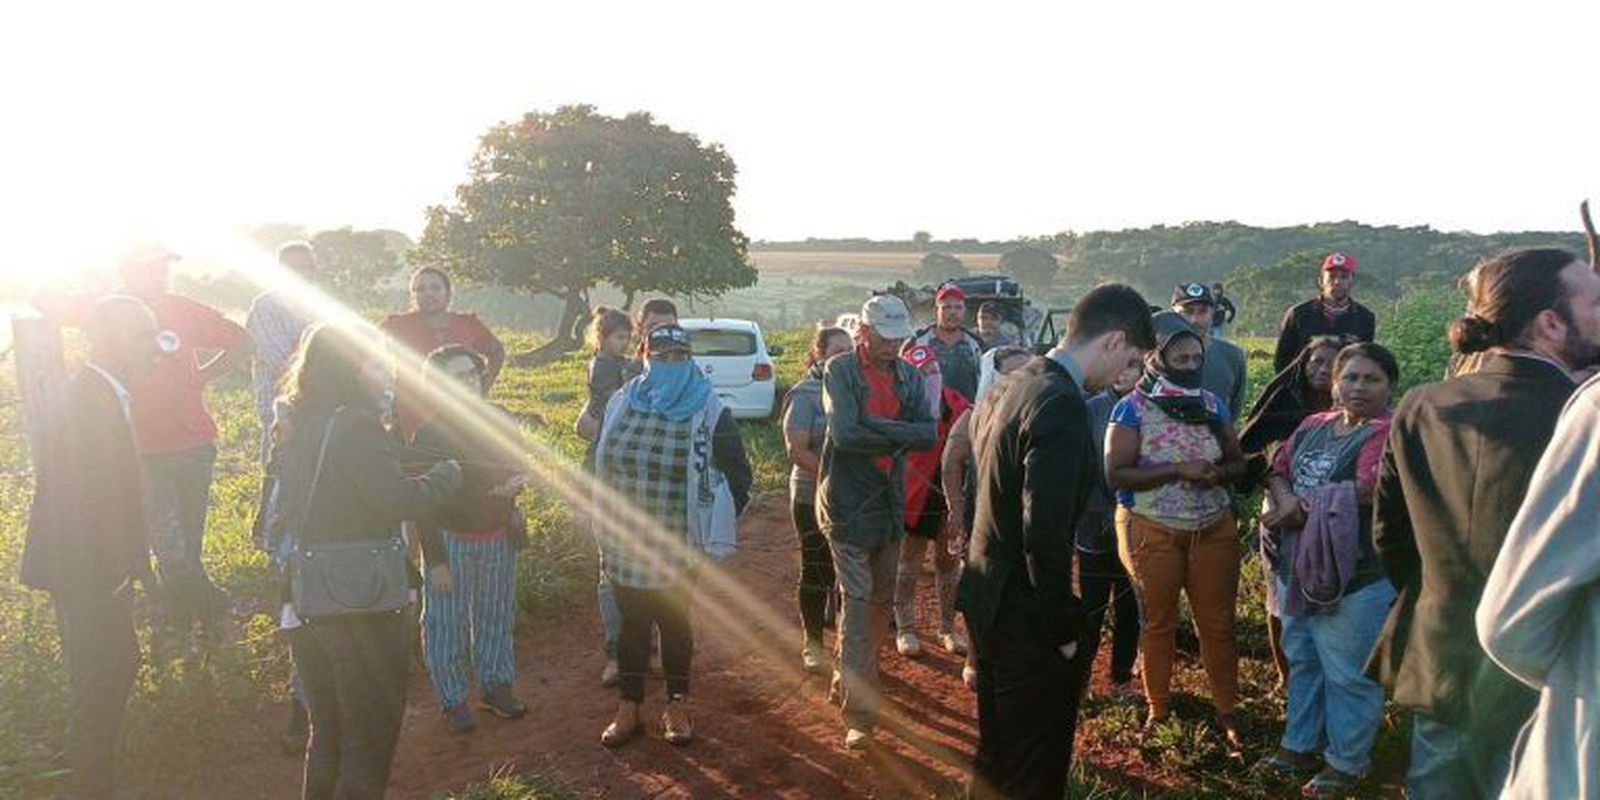 Women from the Landless Movement occupy a farm in Goiás